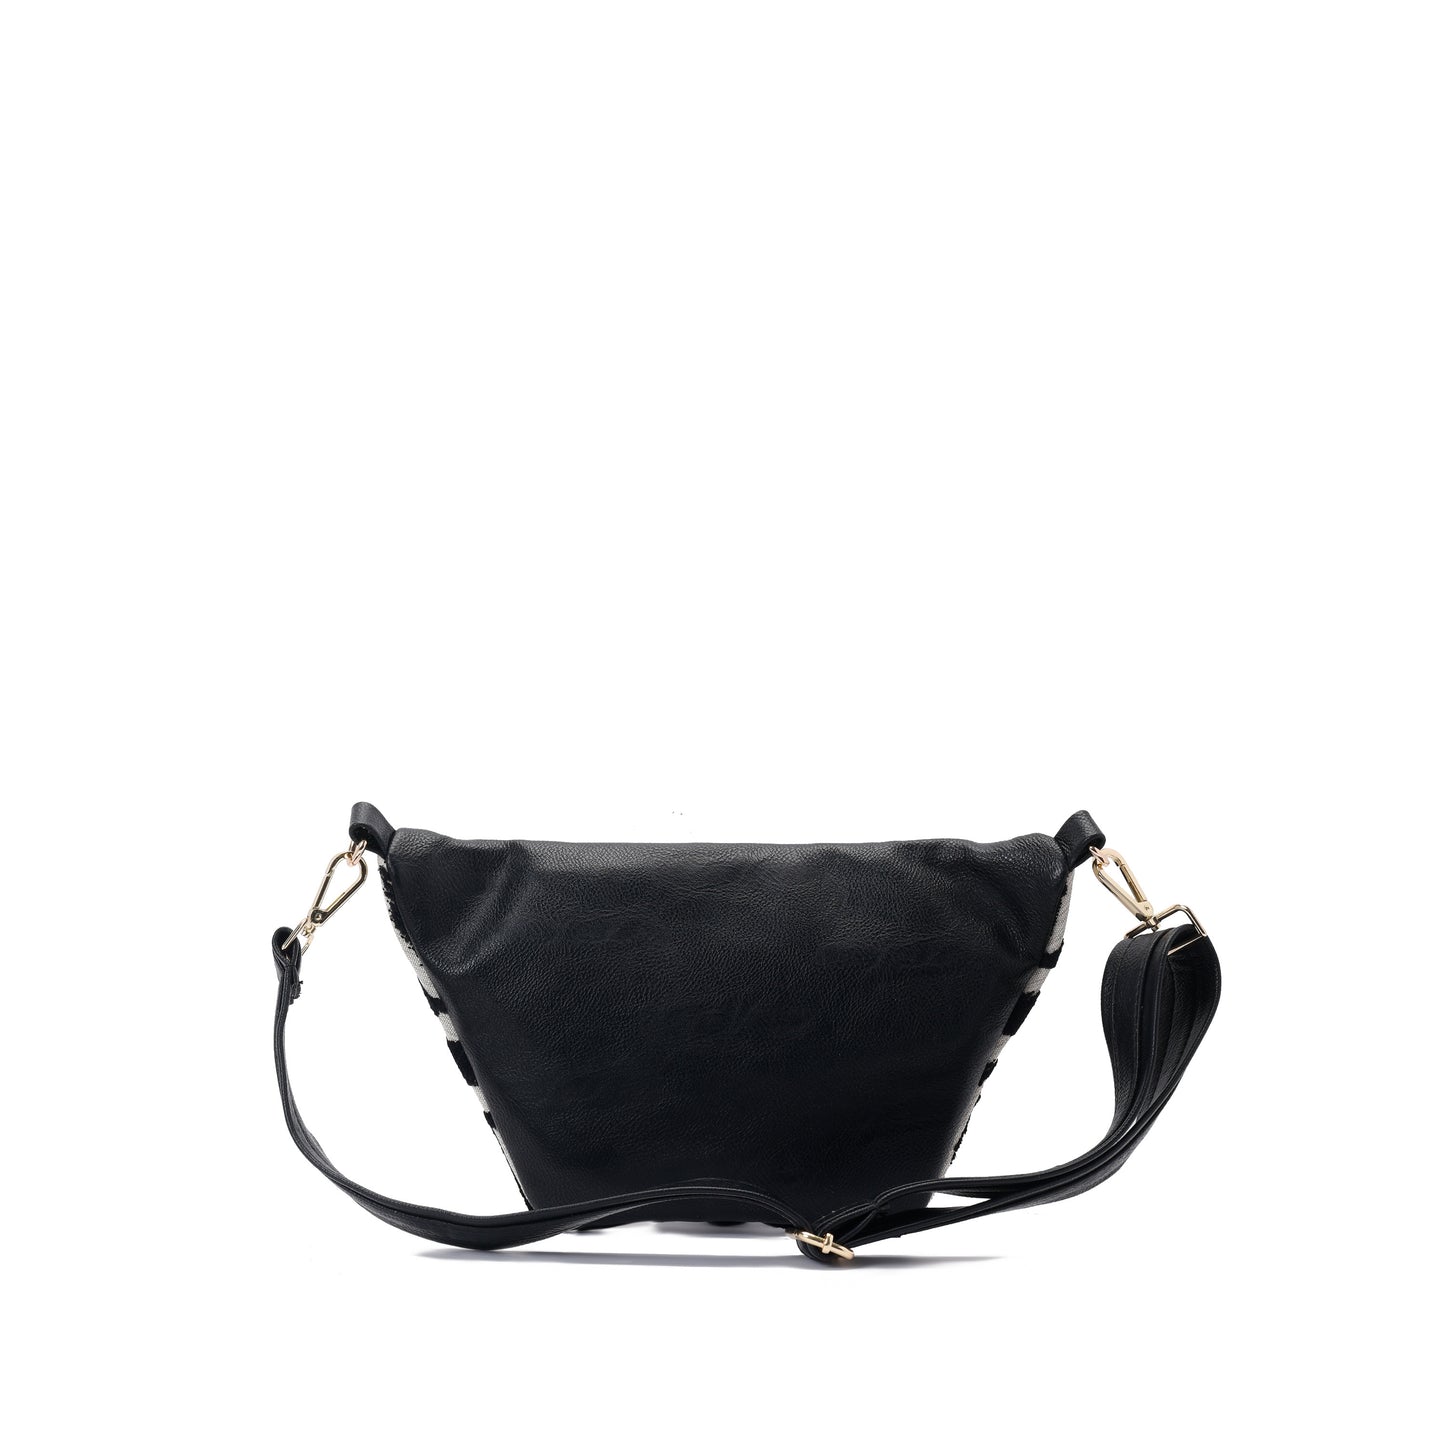 Fanny pack Black and White Color